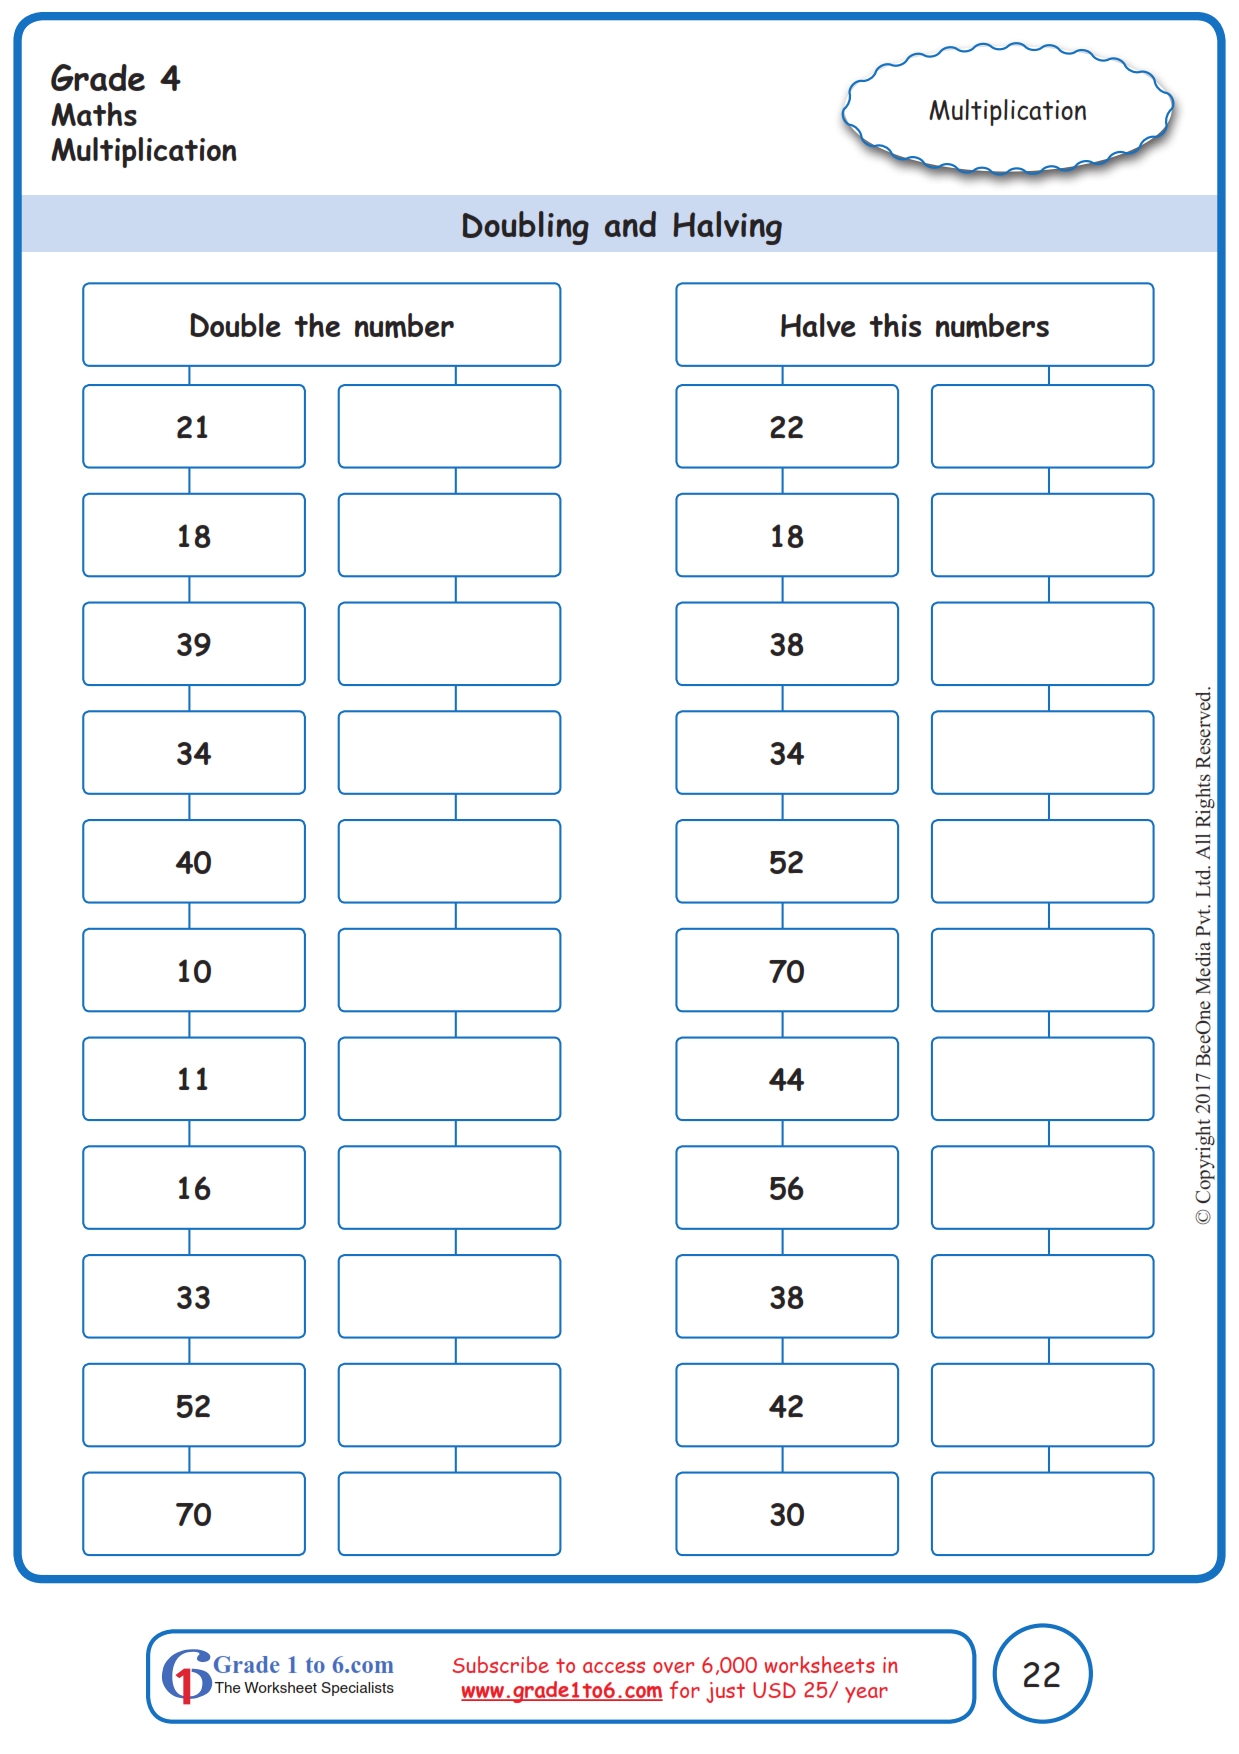 doubling-numicon-worksheet-year-1-teaching-resources-doubling-and-halving-word-problems-year-1